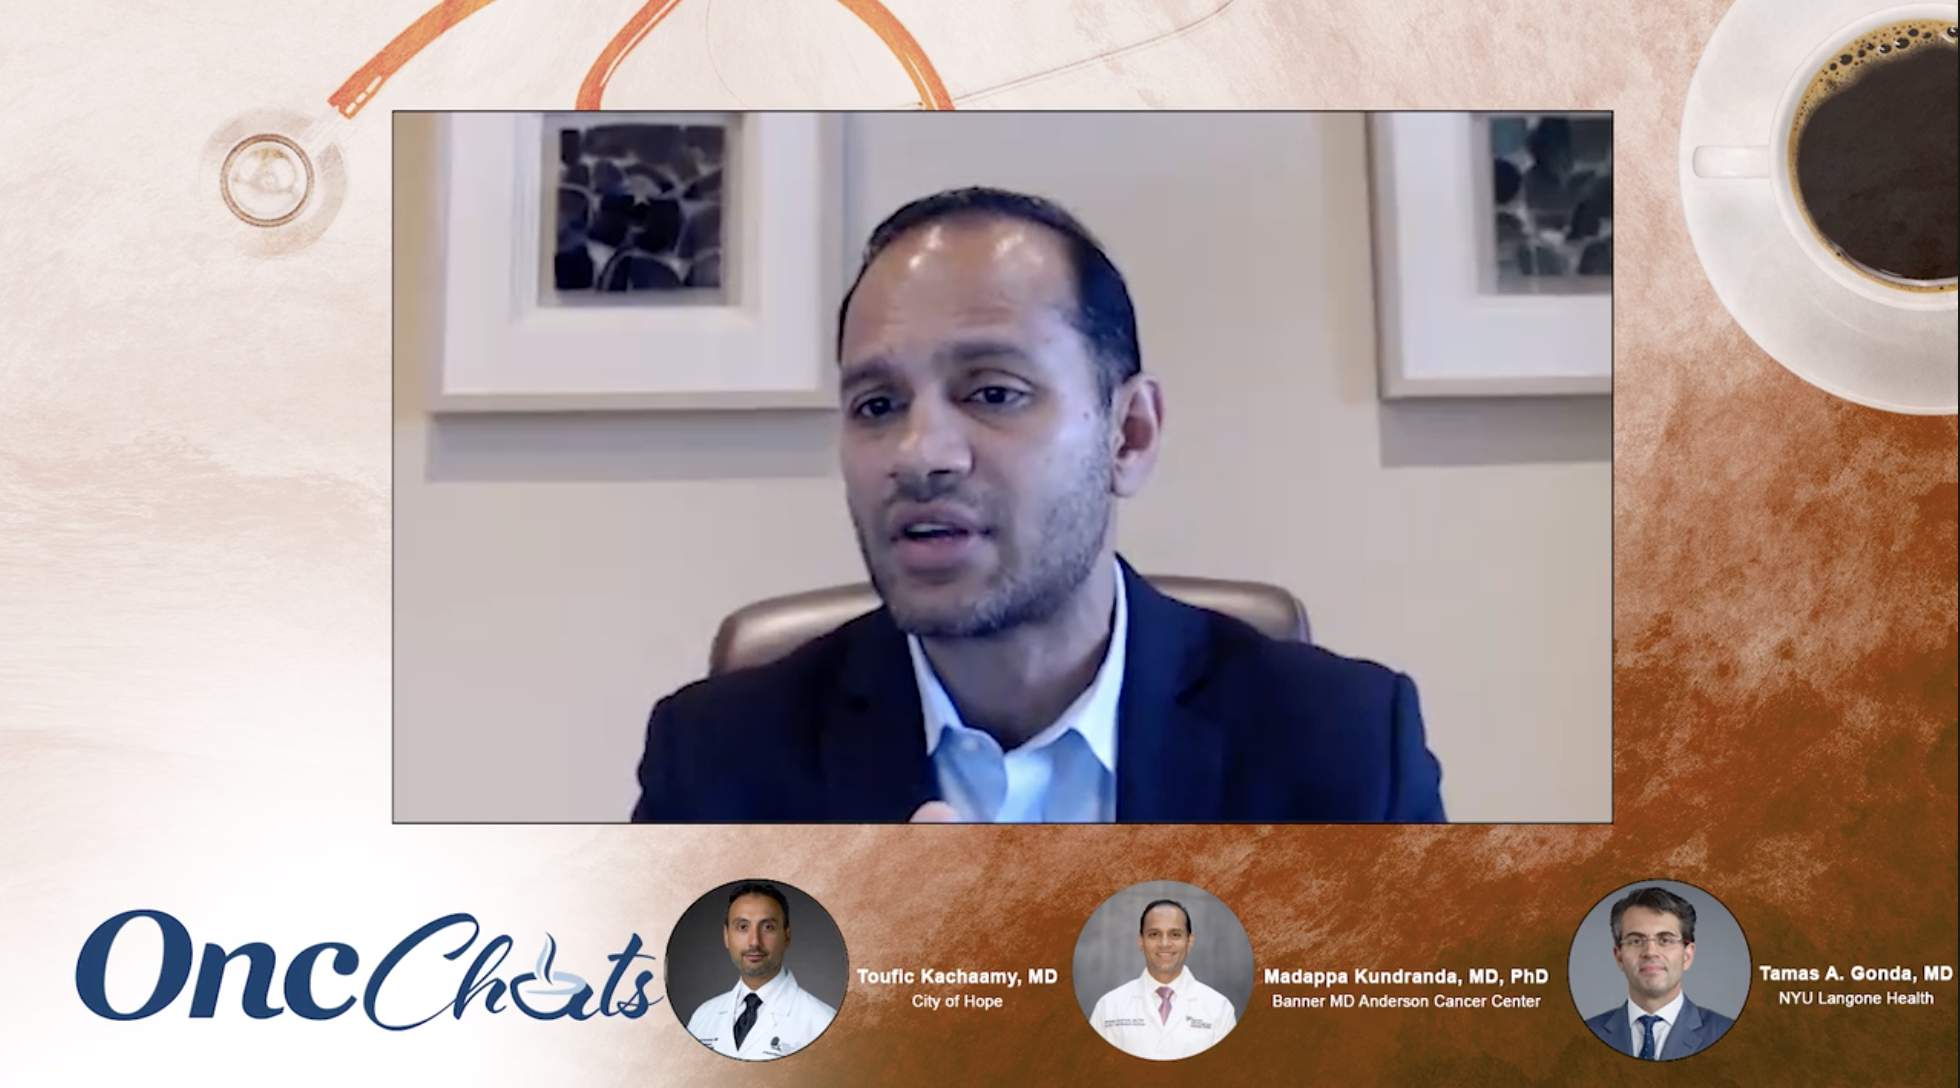 In this fifth episode of OncChats: Leveraging Endoscopic Ultrasound in Pancreatic Cancer, Toufic A. Kachaamy, MD, Madappa Kundranda, MD, PhD, and Tamas A. Gonda, MD, underscore the need for additional research evaluating the role of radiofrequency ablation (RFA) and other approaches in pancreatic cancer, and avenues that are ripe for further exploration.